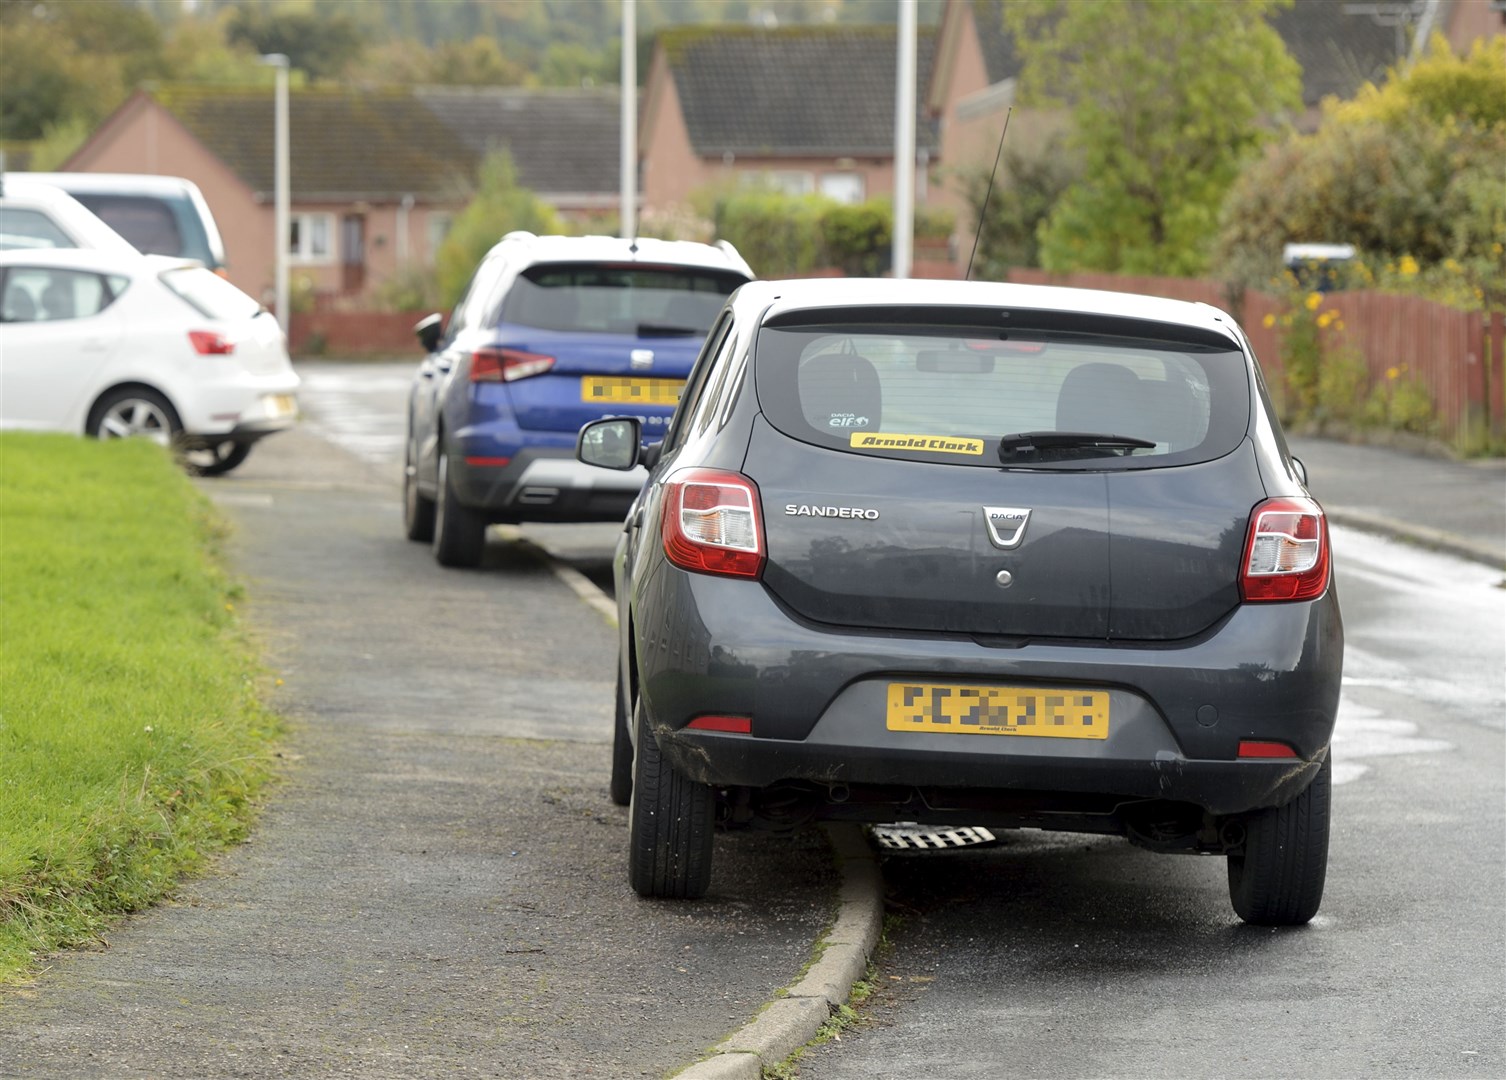 Parking on the pavement is now an offence which could result in a fine. Picture: James MacKenzie